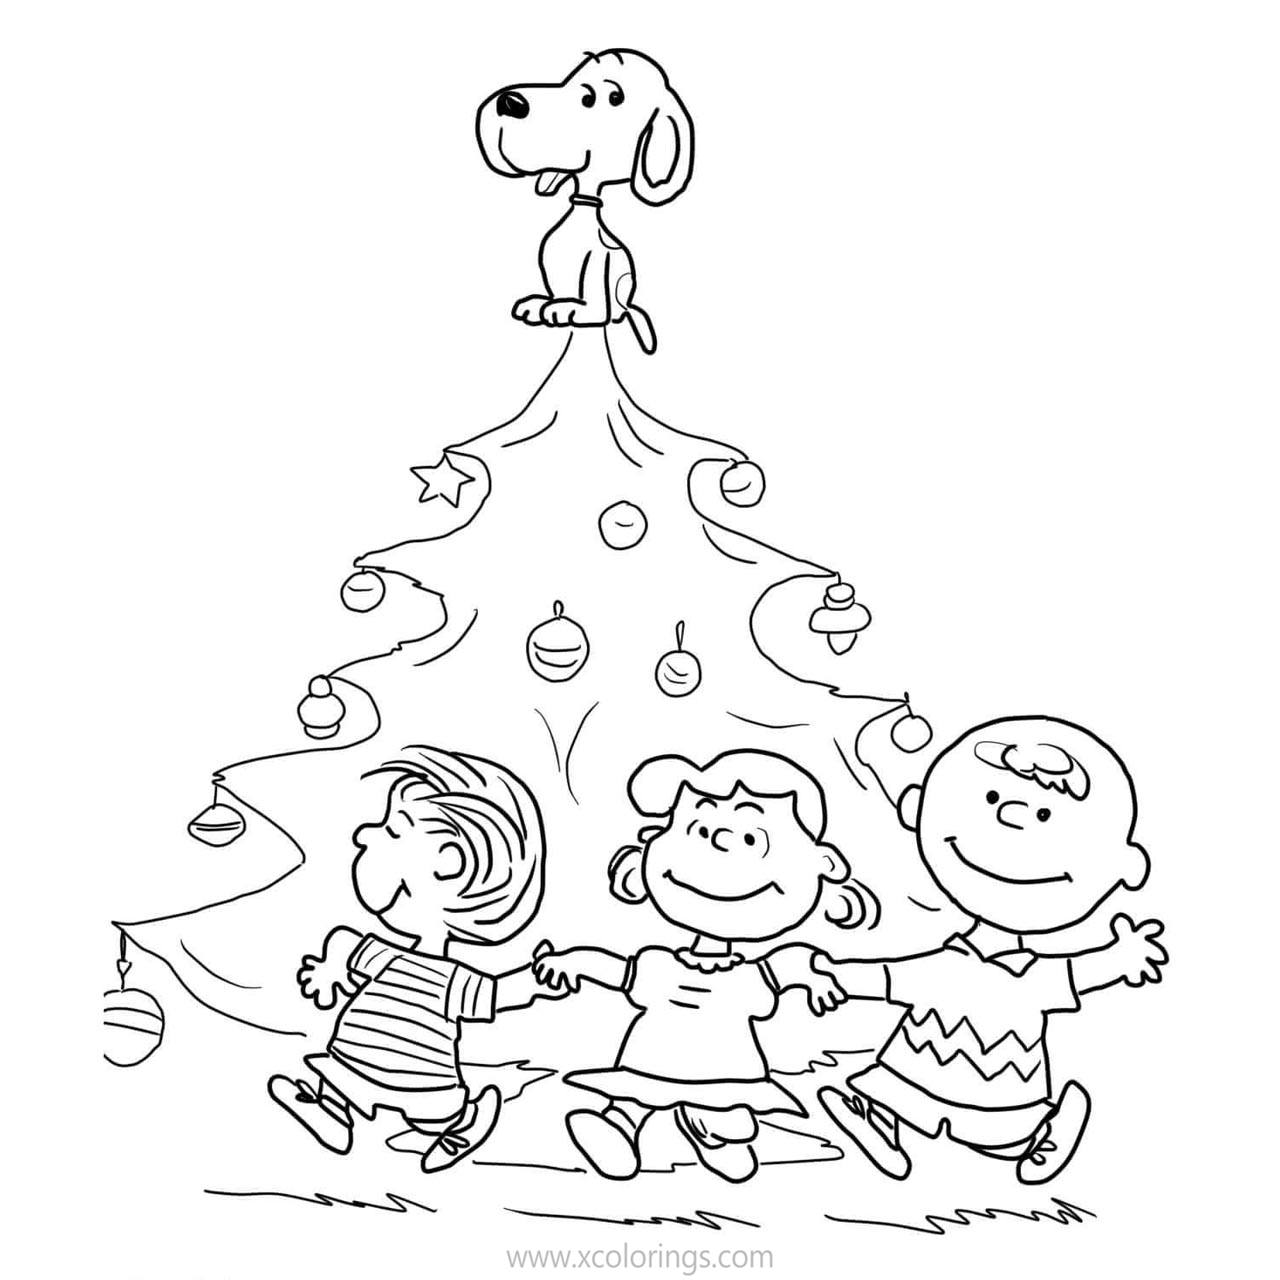 Free Charlie Brown Christmas Coloring Pages Snoopy On the Christmas Tree printable